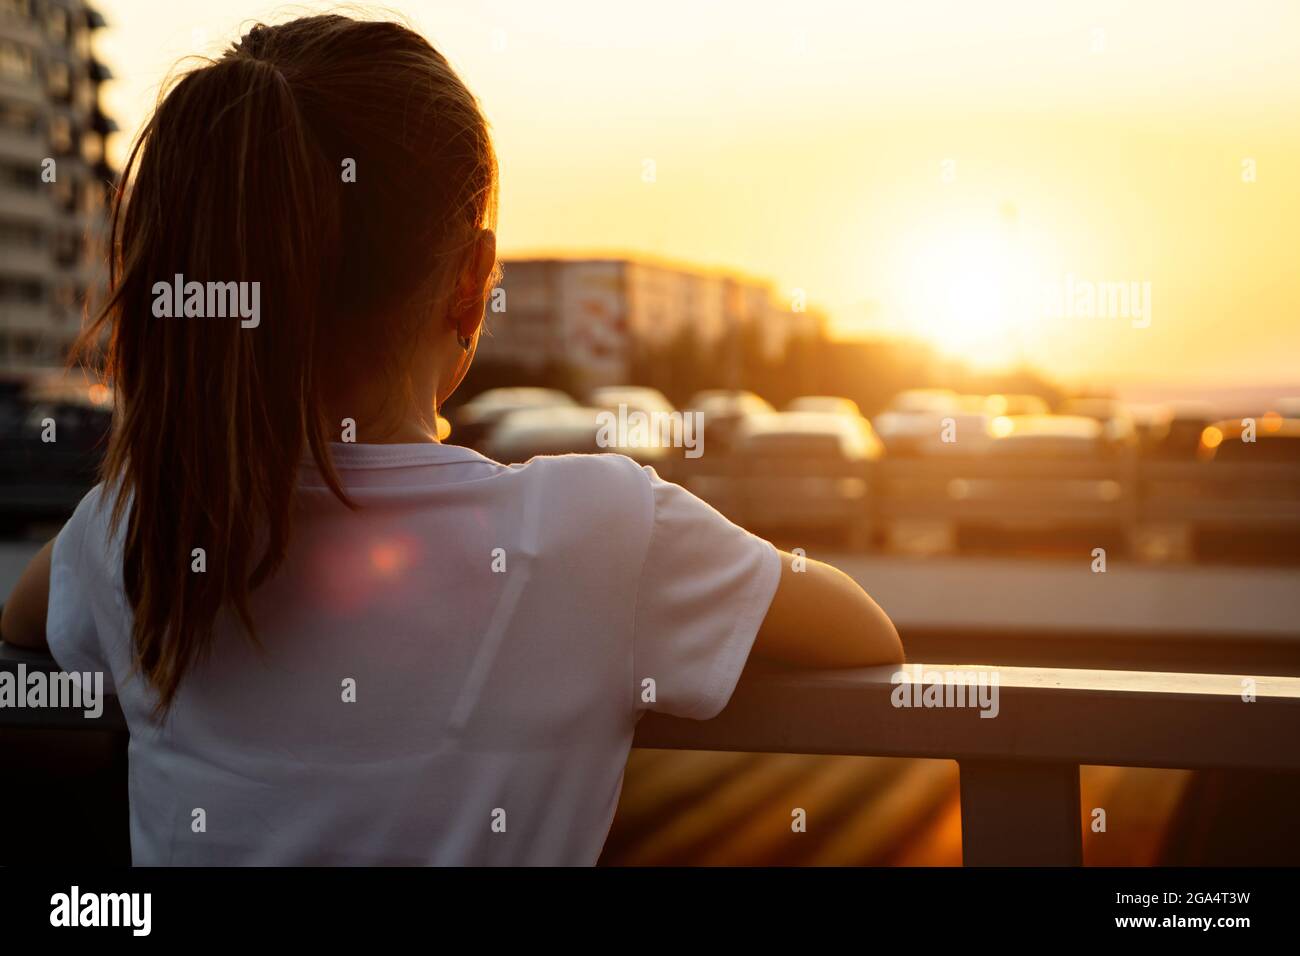 Schoolgirl at back sunset. Teenage girl blonde with long hair in ponytail admires setting sun light and blurry city buildings close backside view Stock Photo